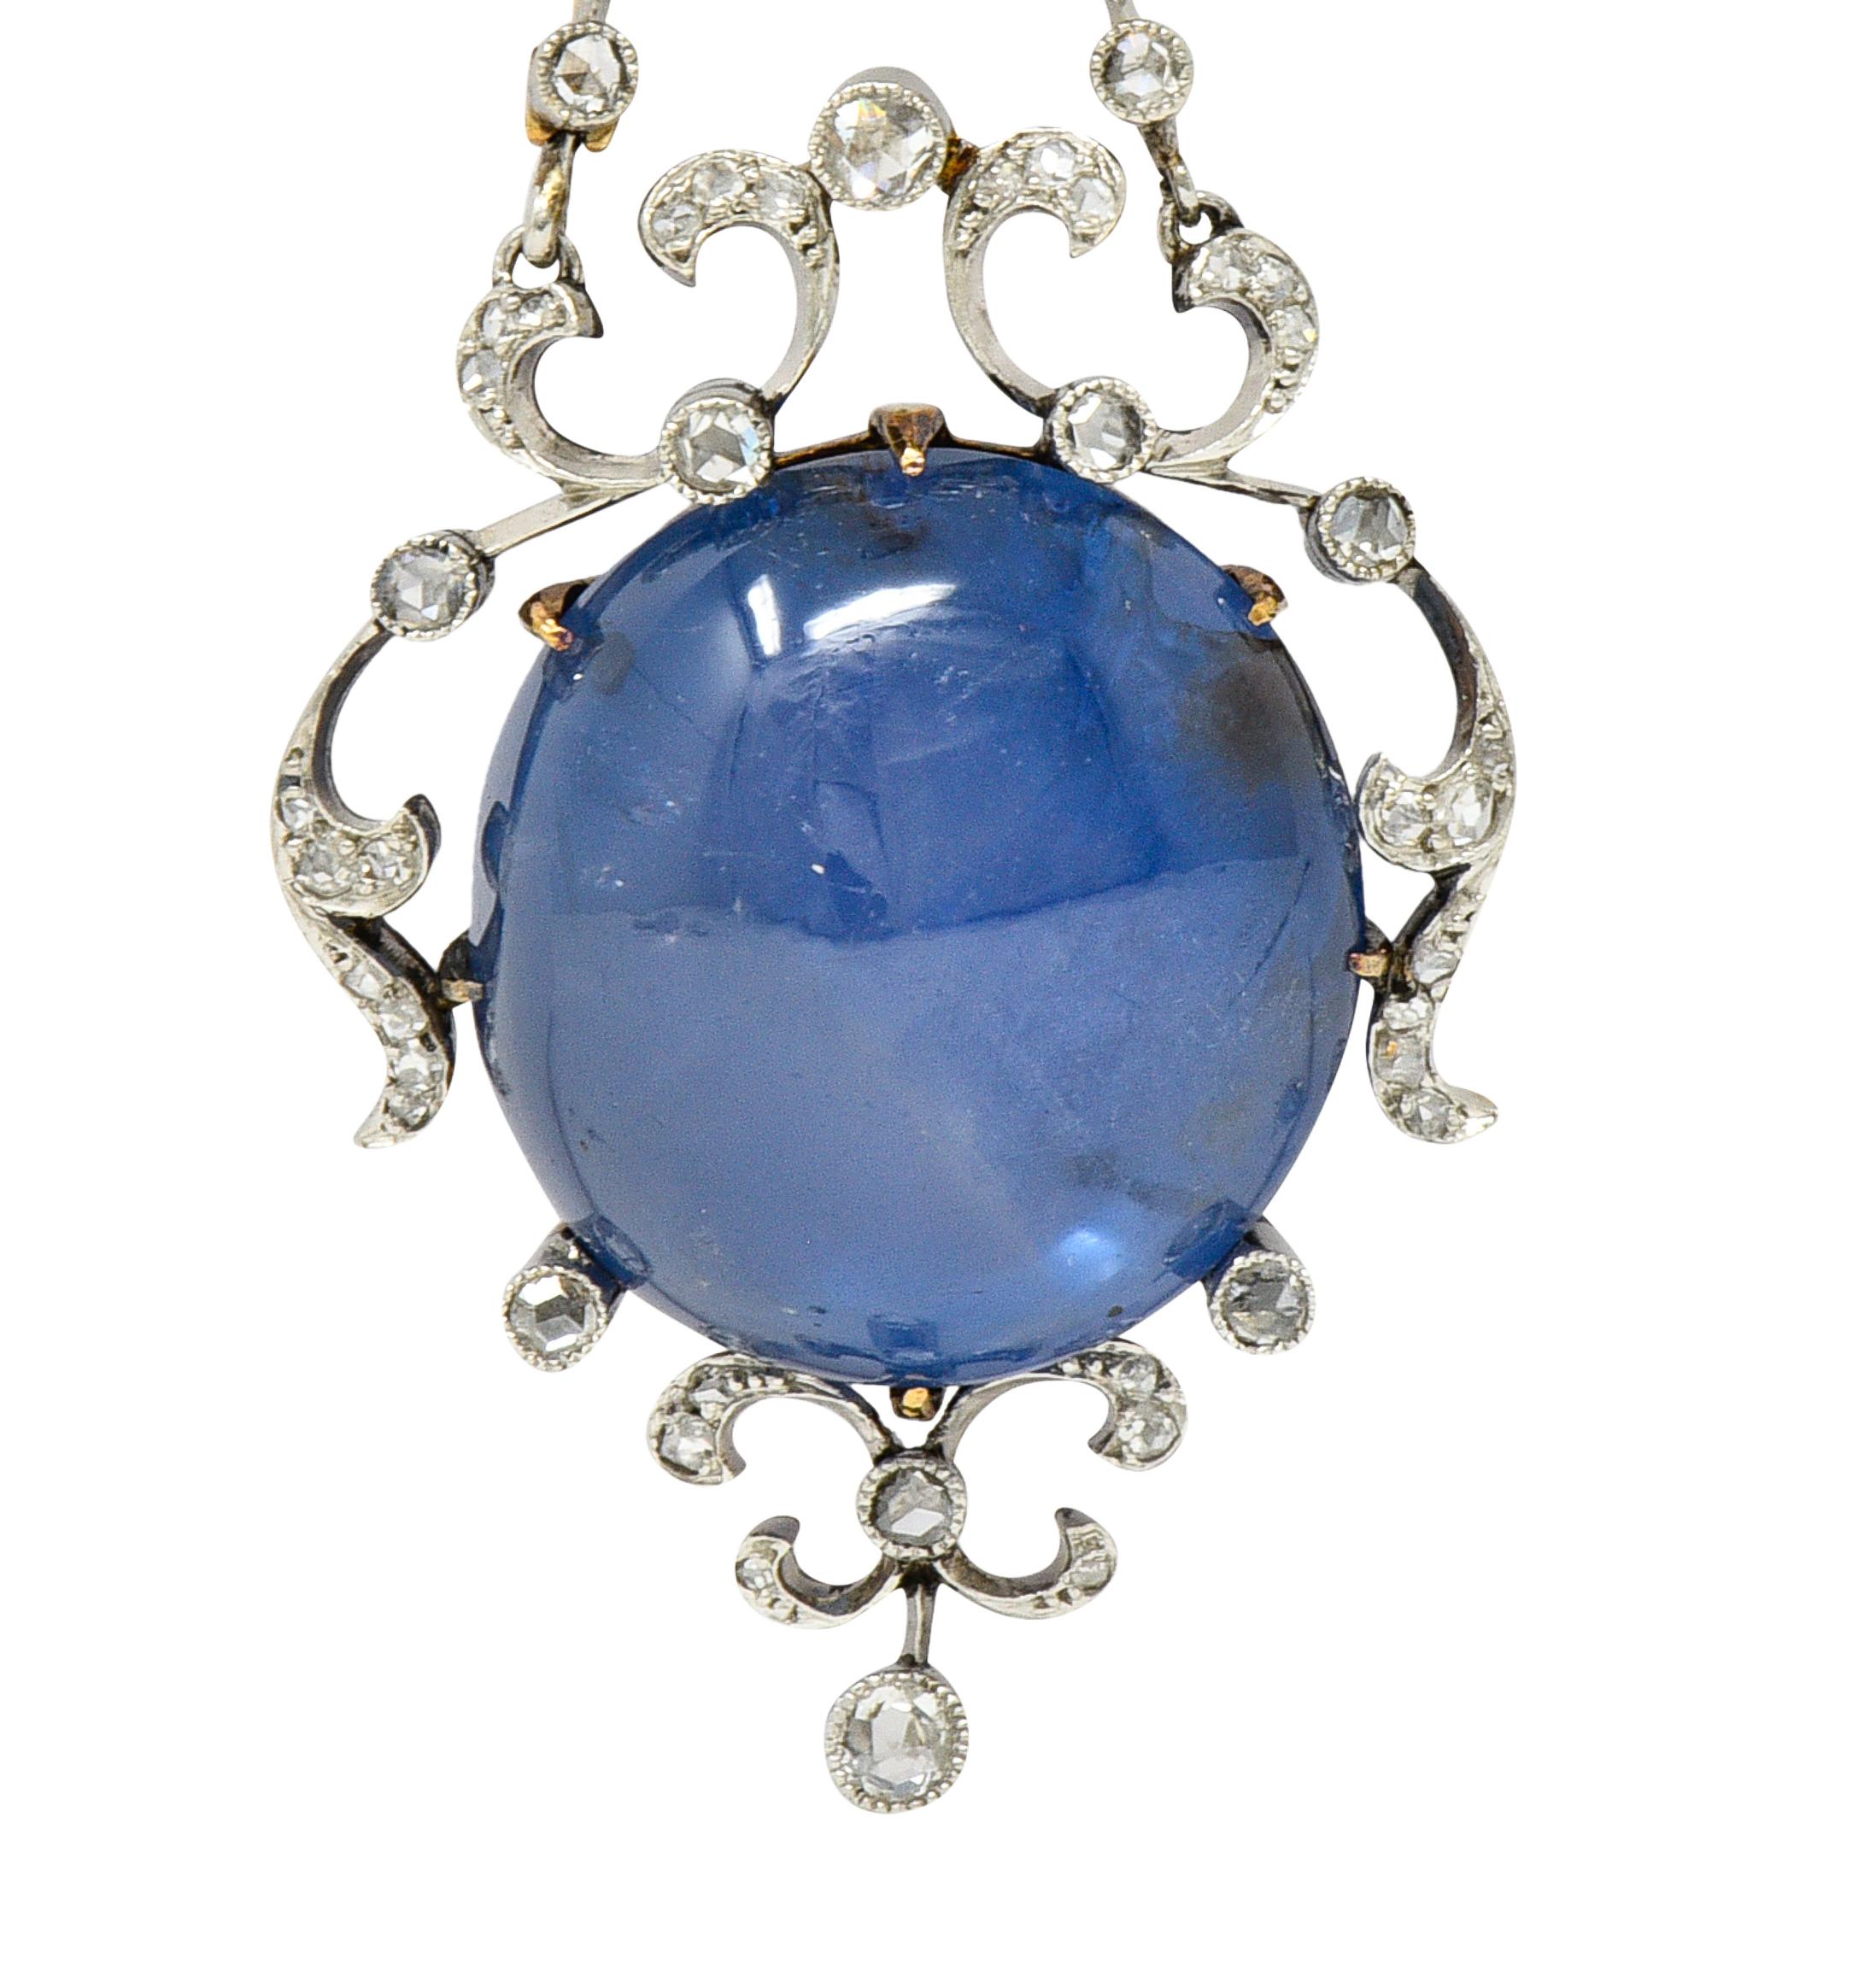 French Edwardian 61.83 Carats Star Sapphire Diamond Silver Whiplash Pendant In Excellent Condition For Sale In Philadelphia, PA